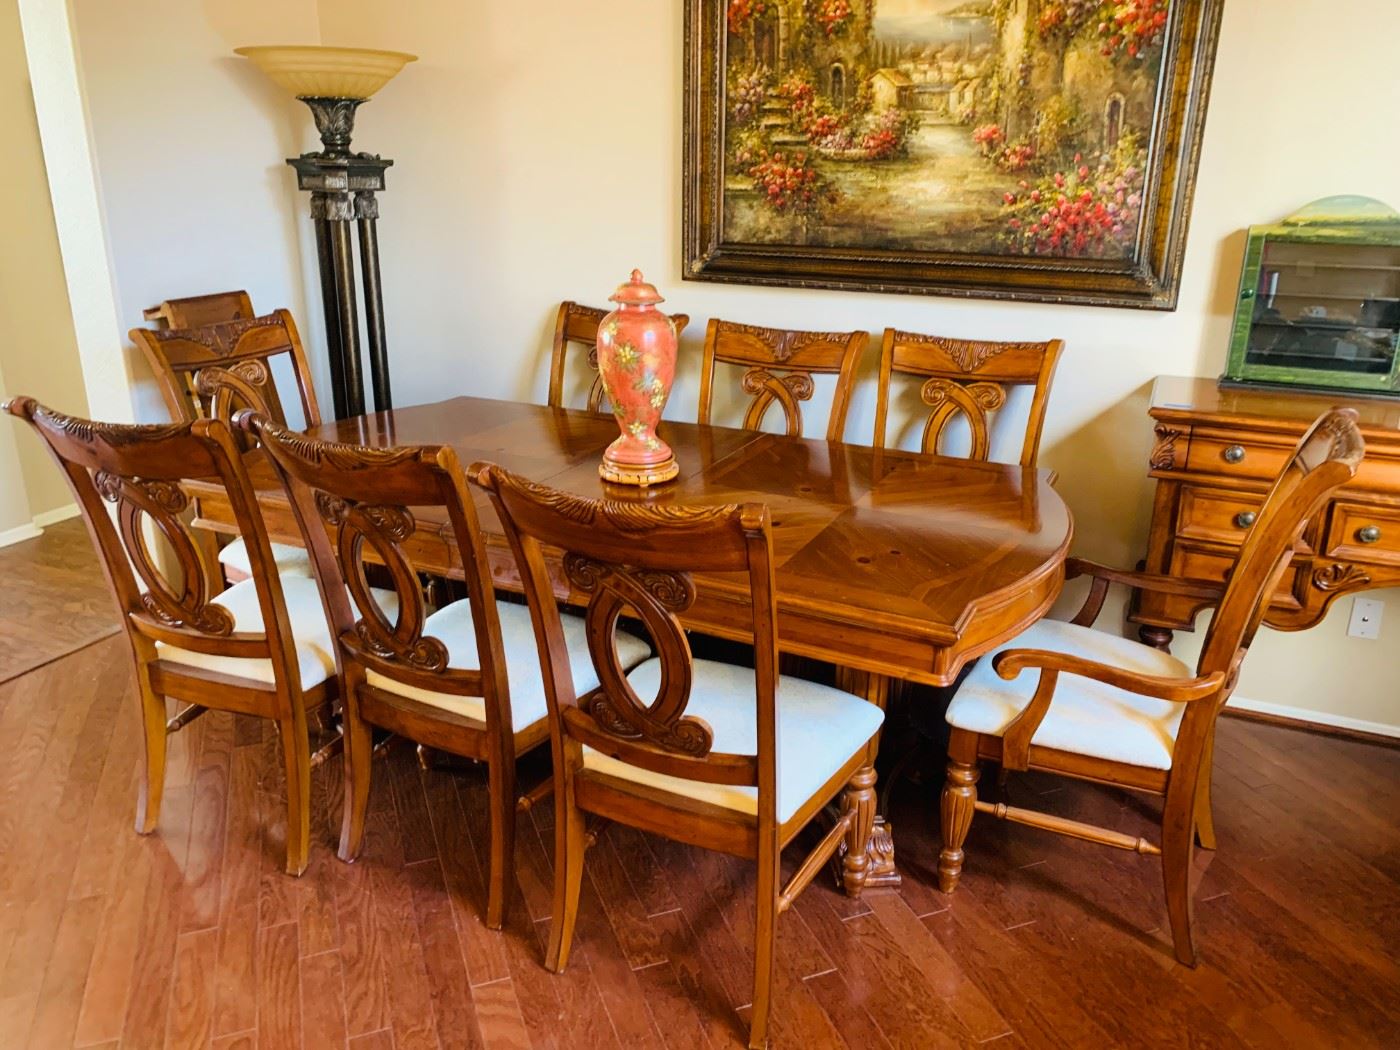 Dining Table w/8 Chairs & 2 Table Leaves